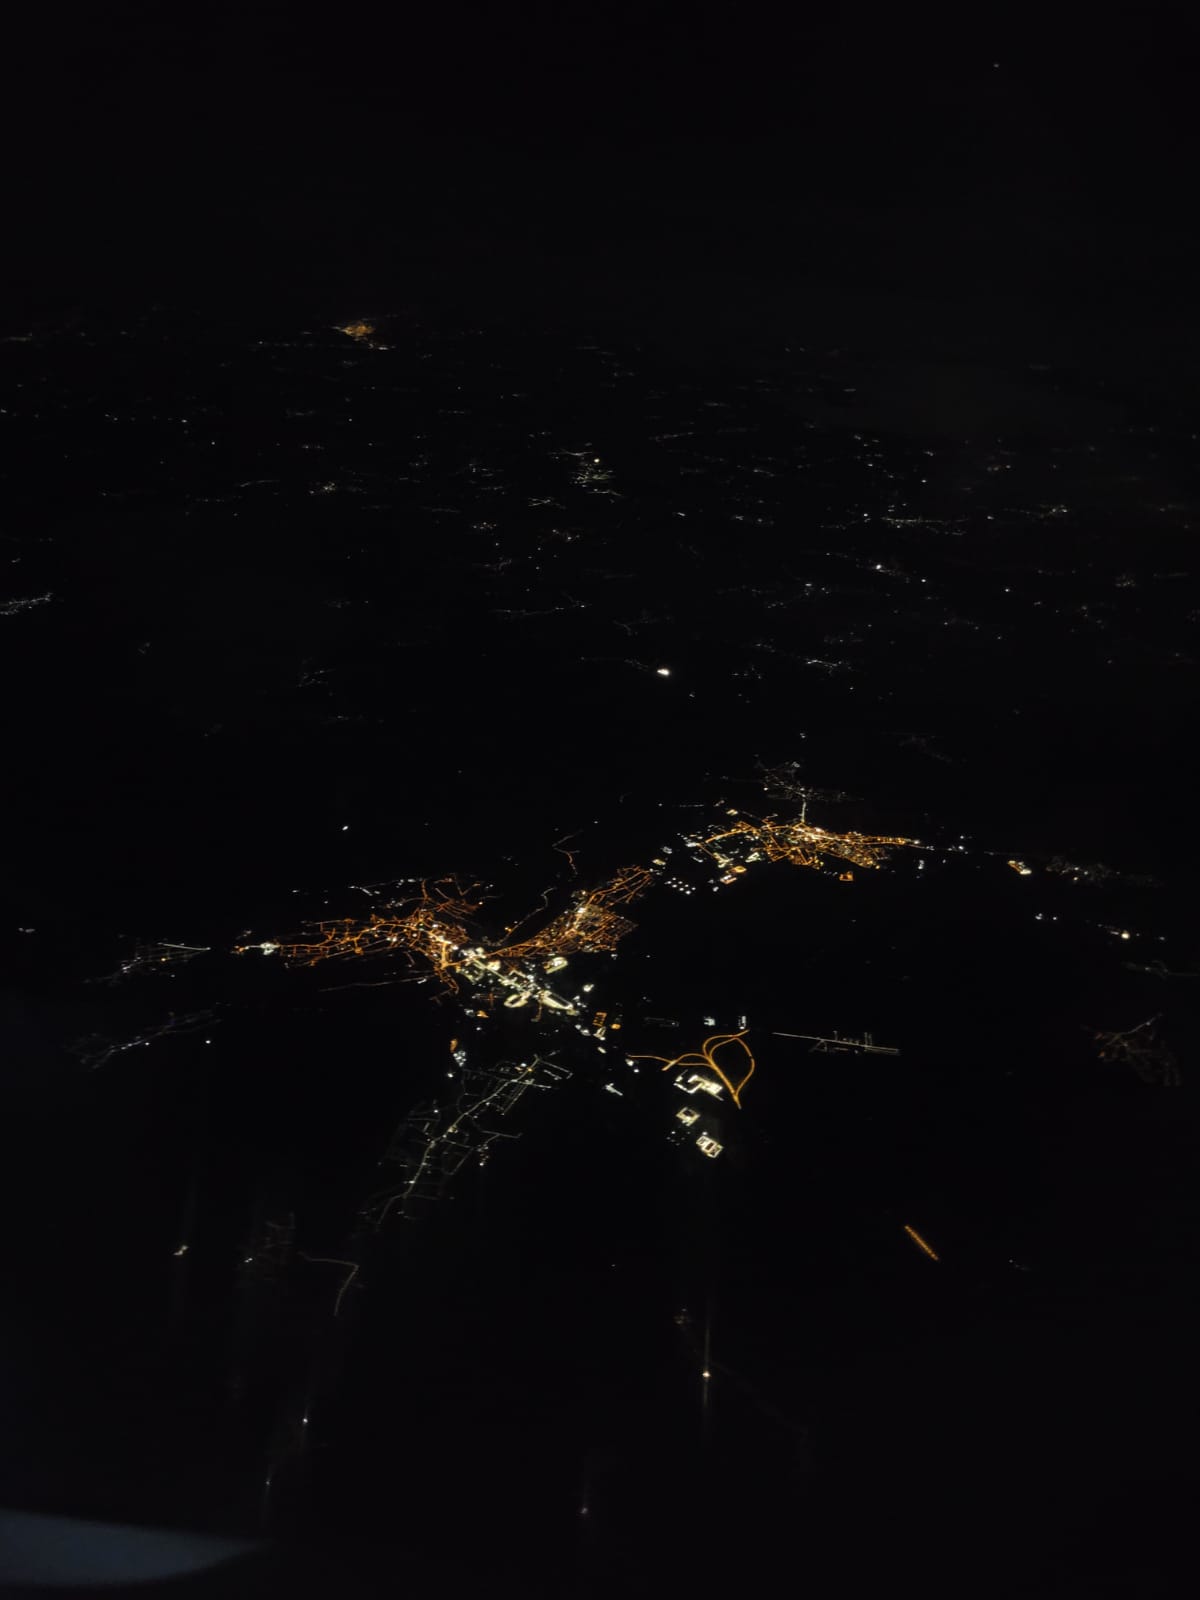 City lights seen from the airplane; Credits: Vlad Popescu